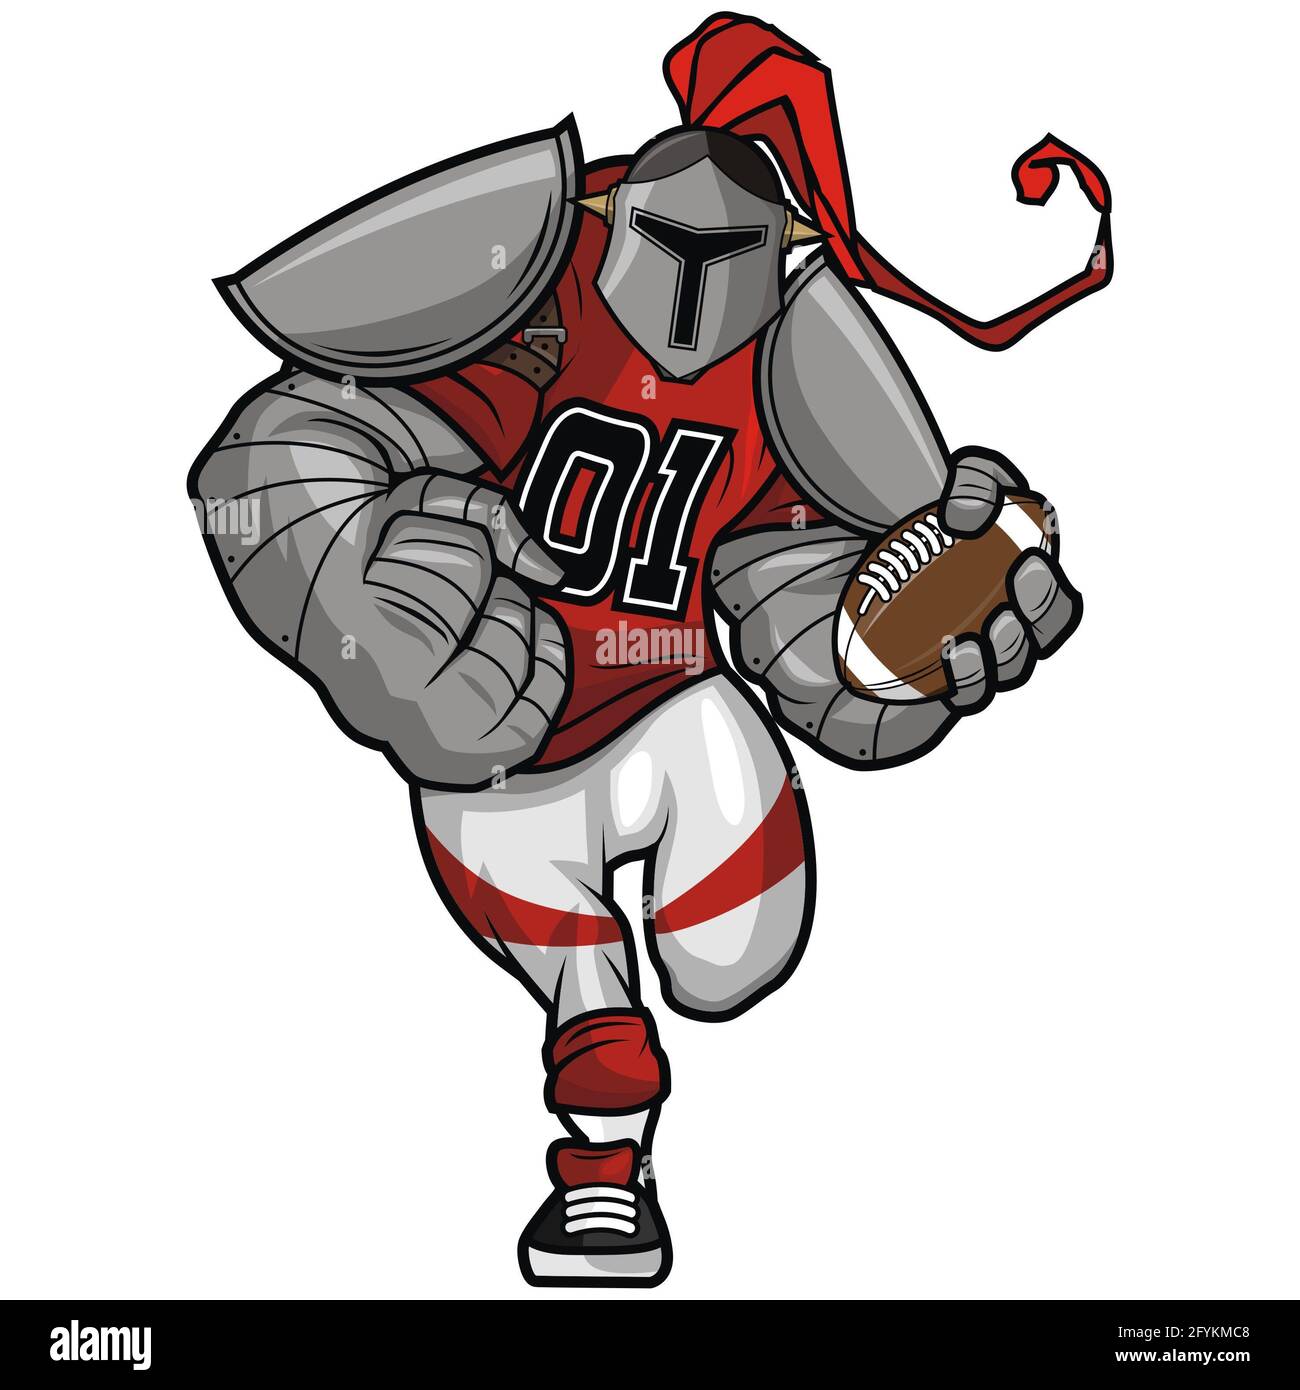 American Football character mascot design with Silver Knight theme, for merchandising, stickers or t-shirts Stock Photo